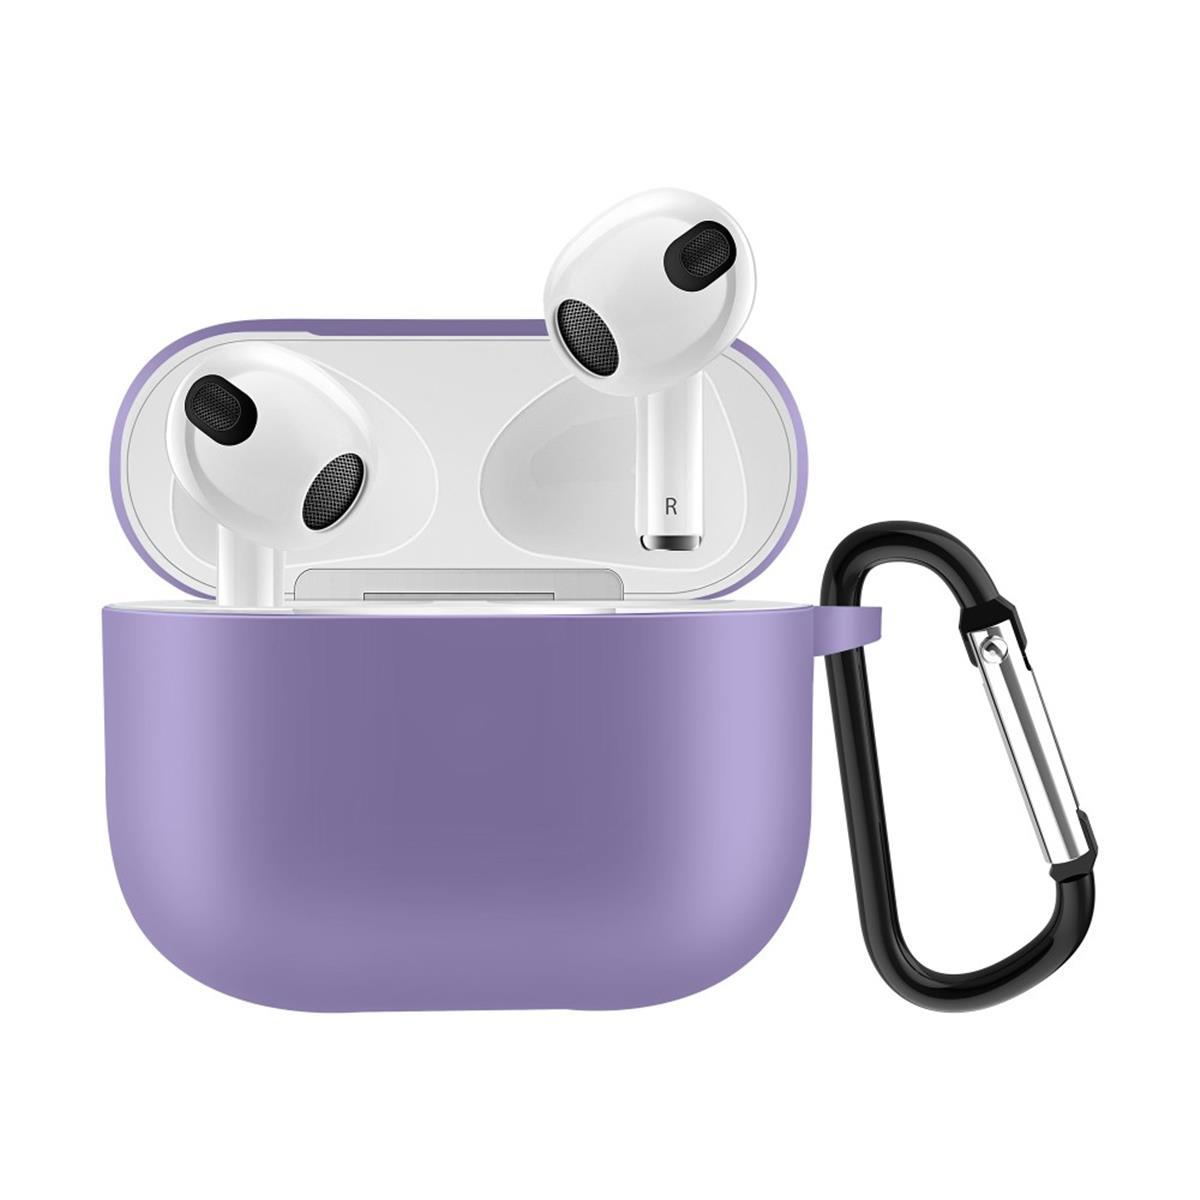 COVERKINGZ Silikoncover für AirPods 76811 Apple Ladecase Lila, 3 Damen,